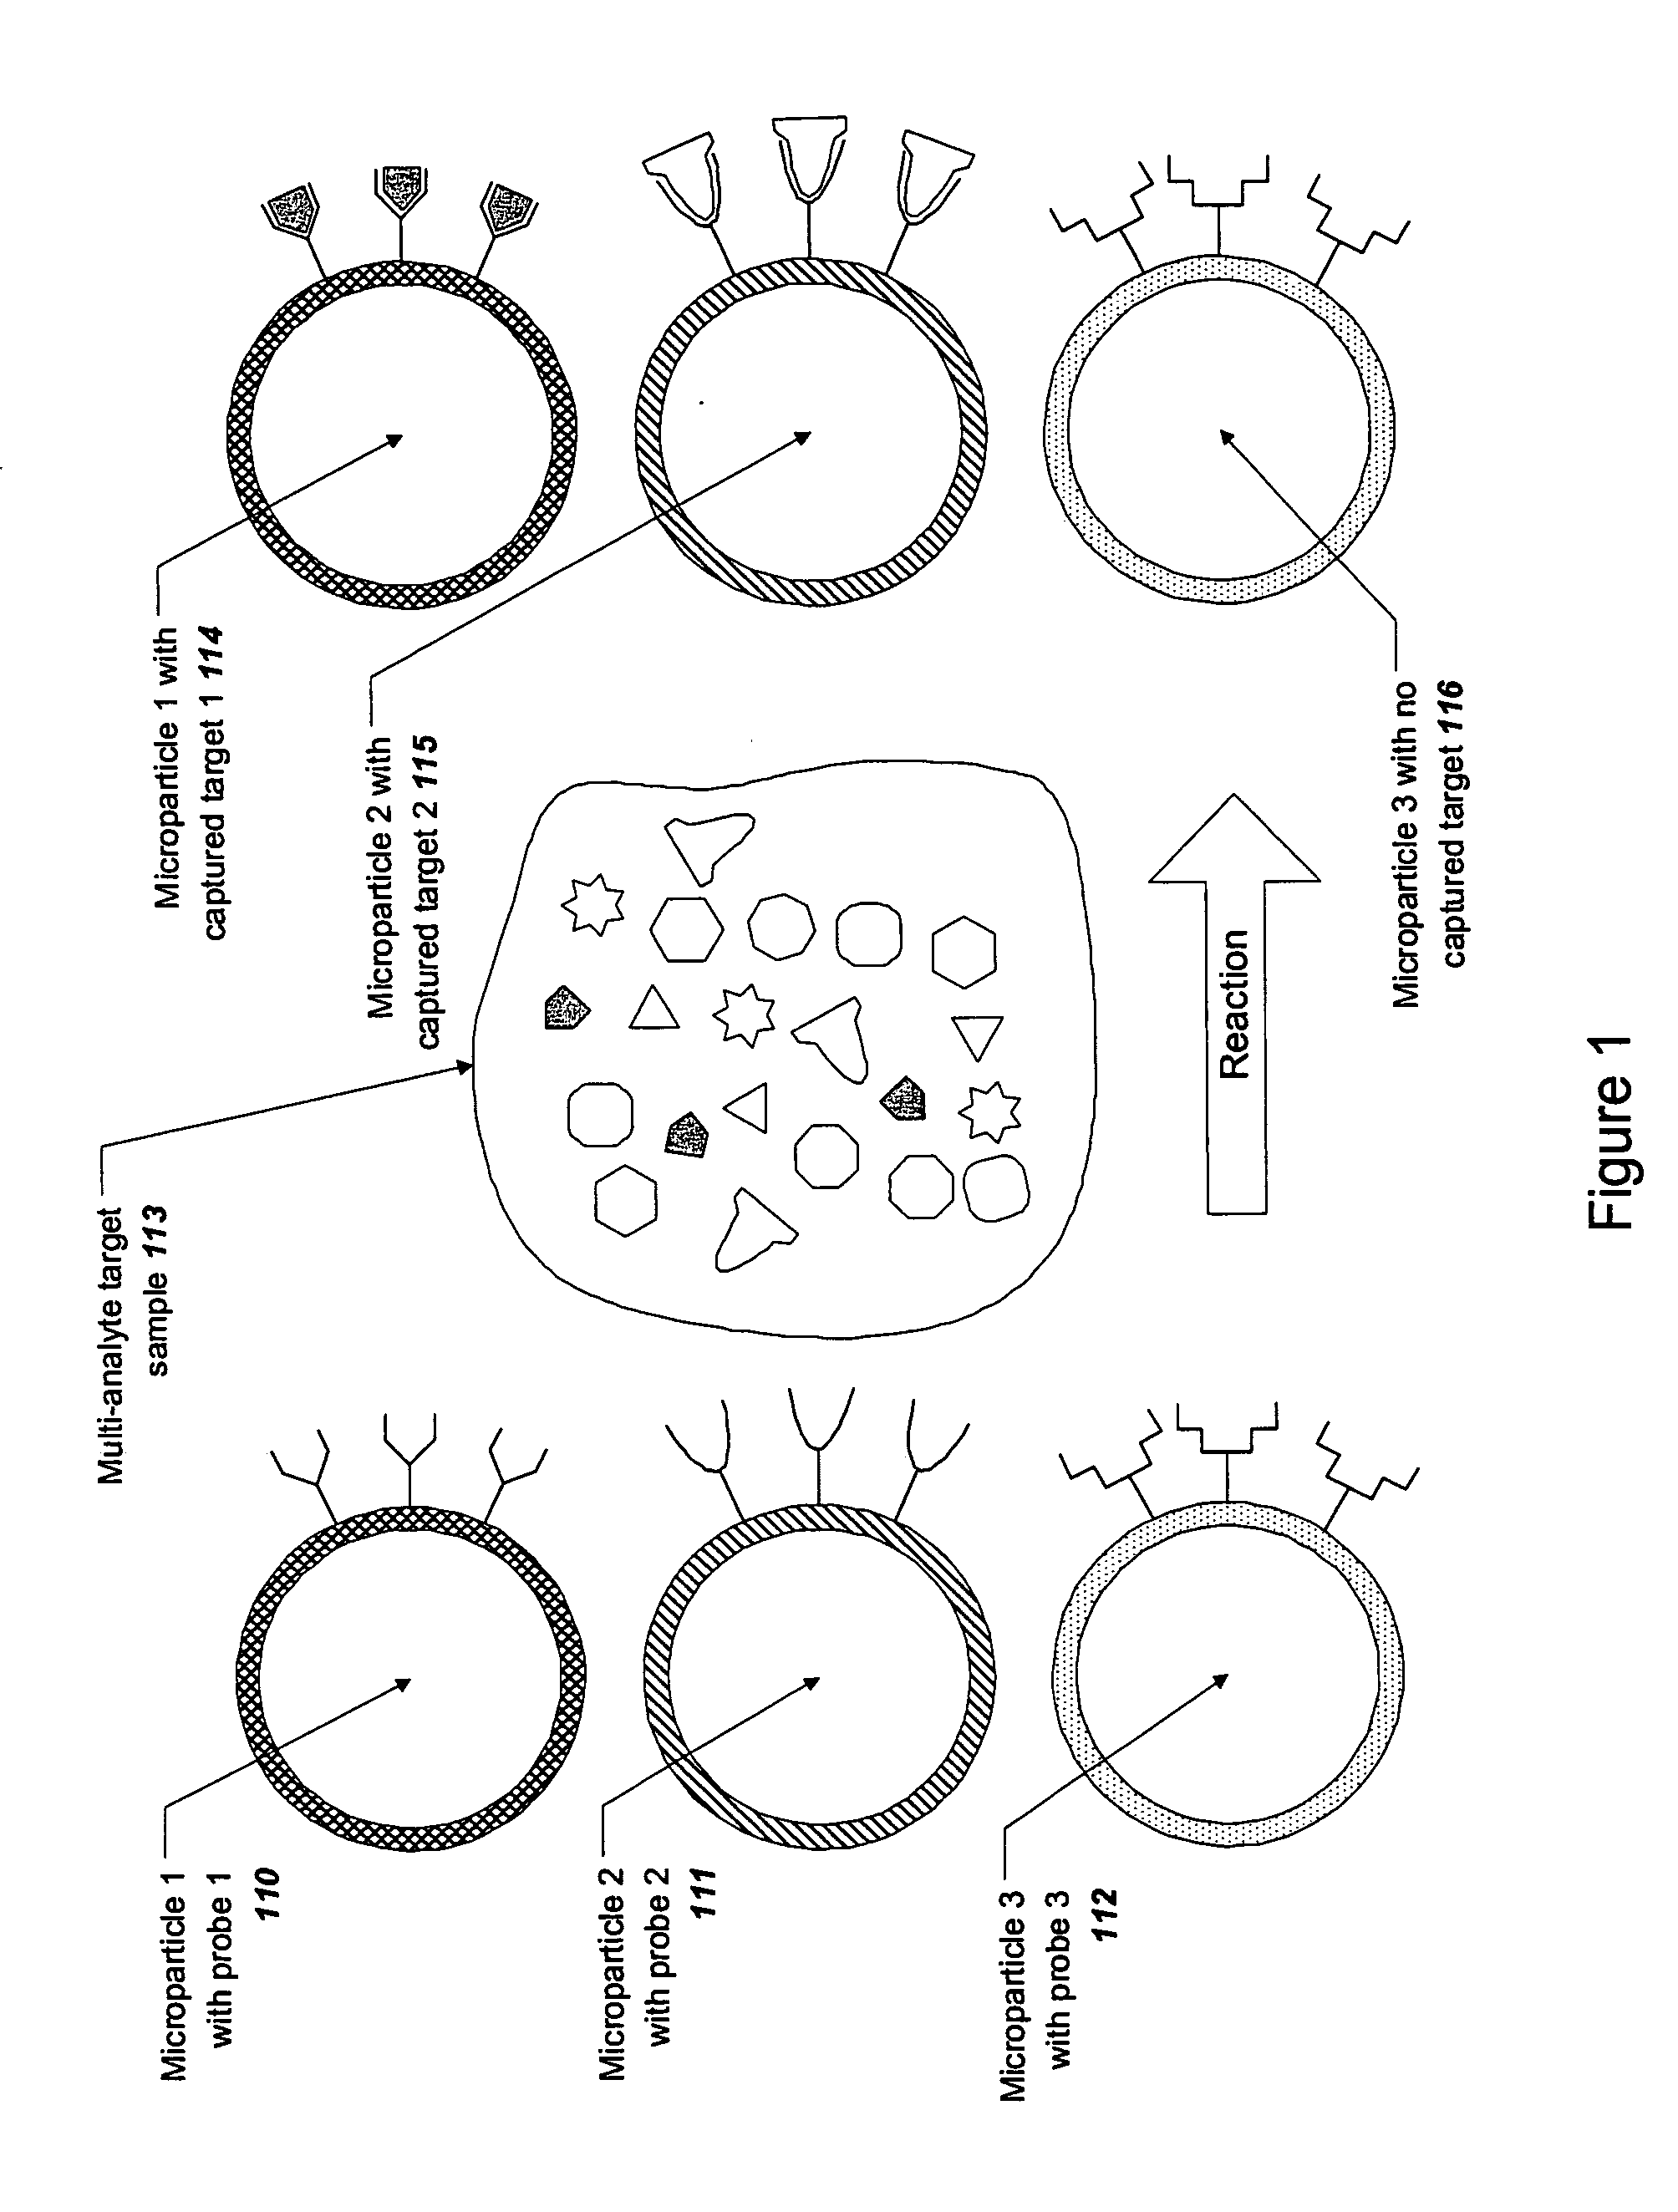 Microparticle-based methods and systems and applications thereof